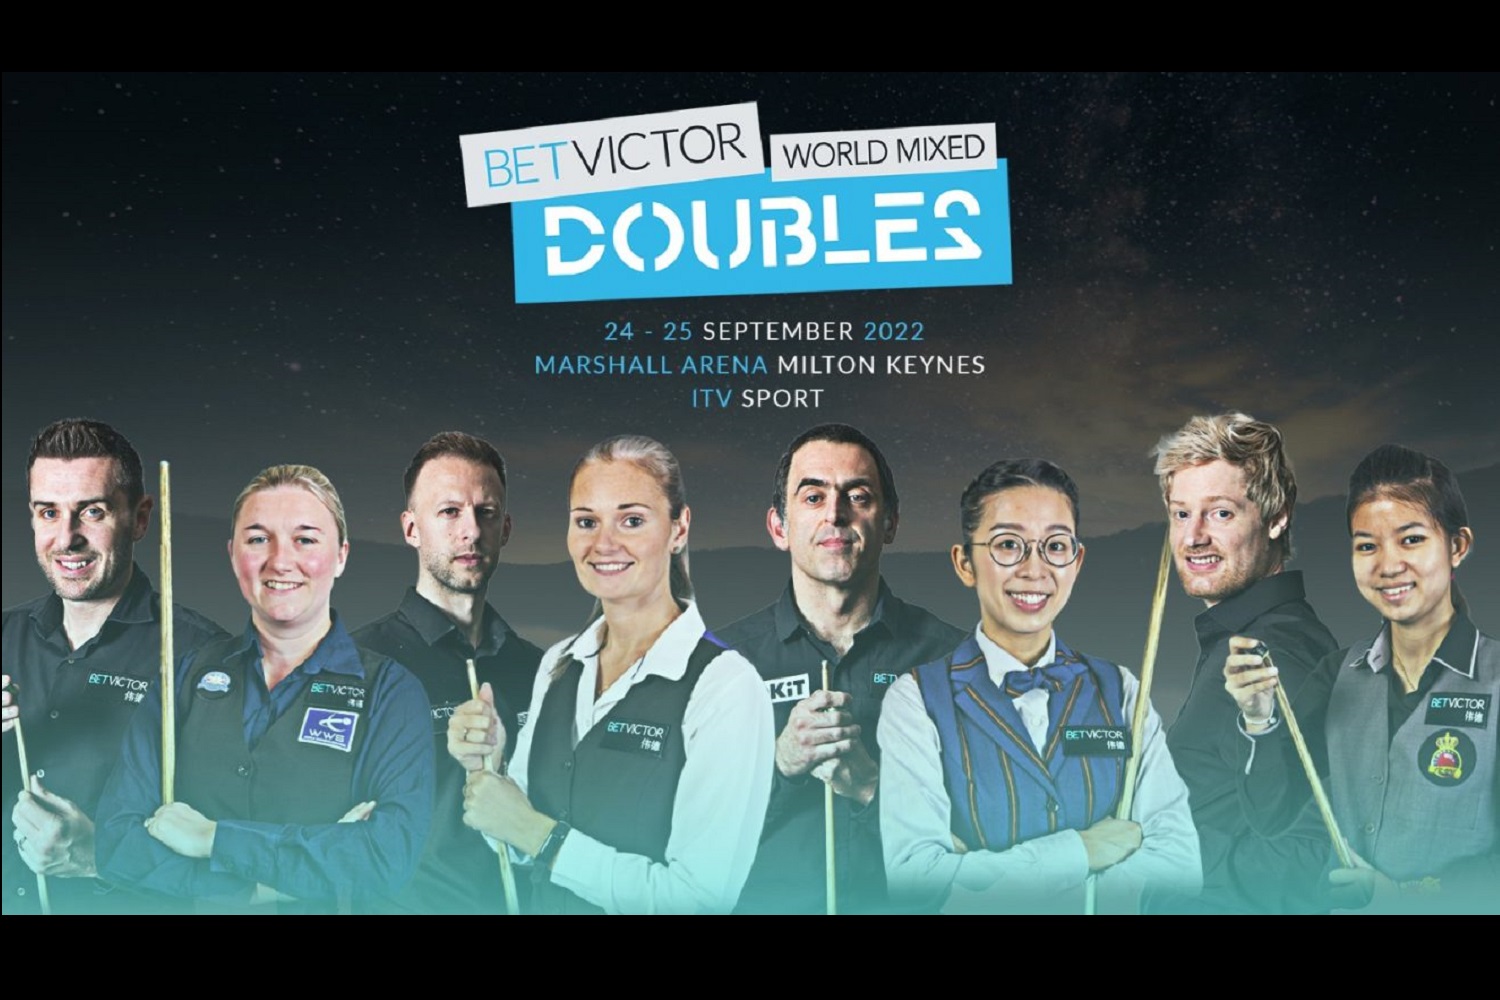 world mixed doubles snooker tickets